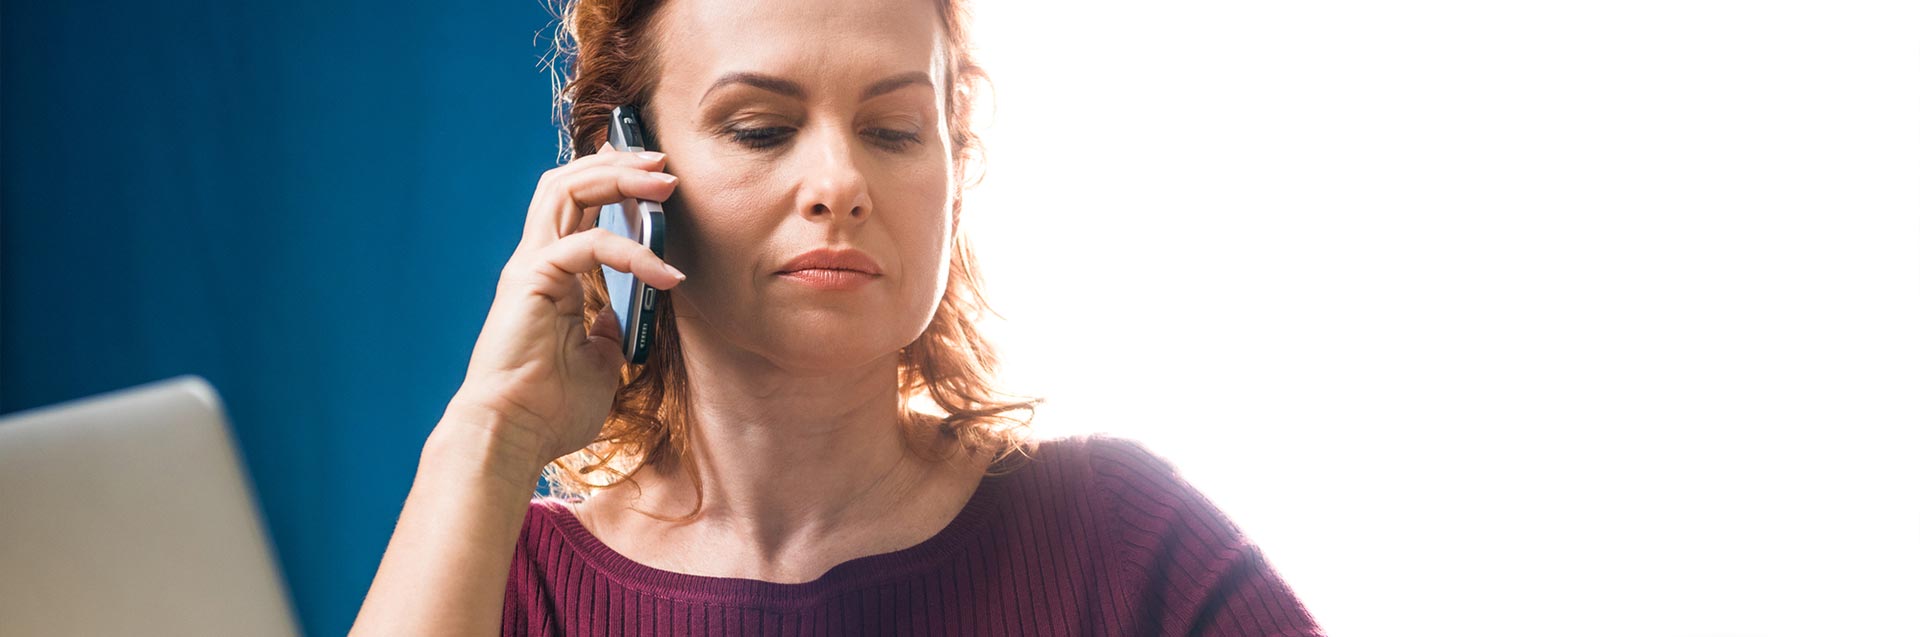 A female patient on the phone